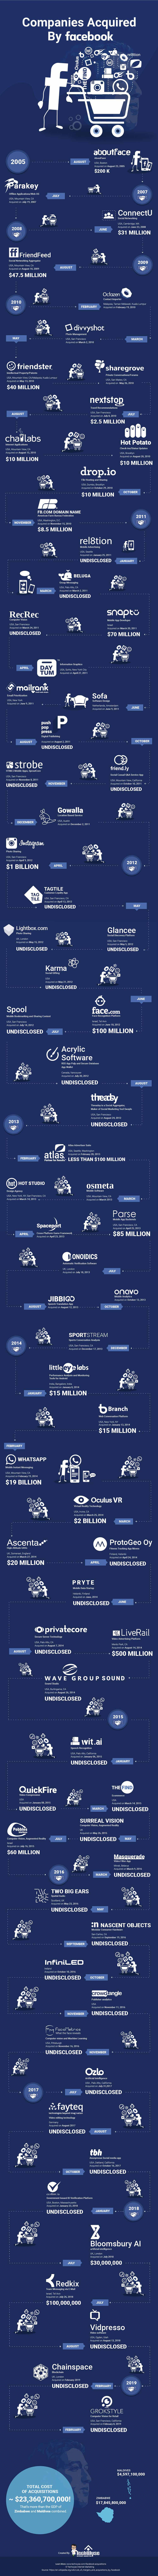 Facebook Acquisitions – The Complete List (2019)